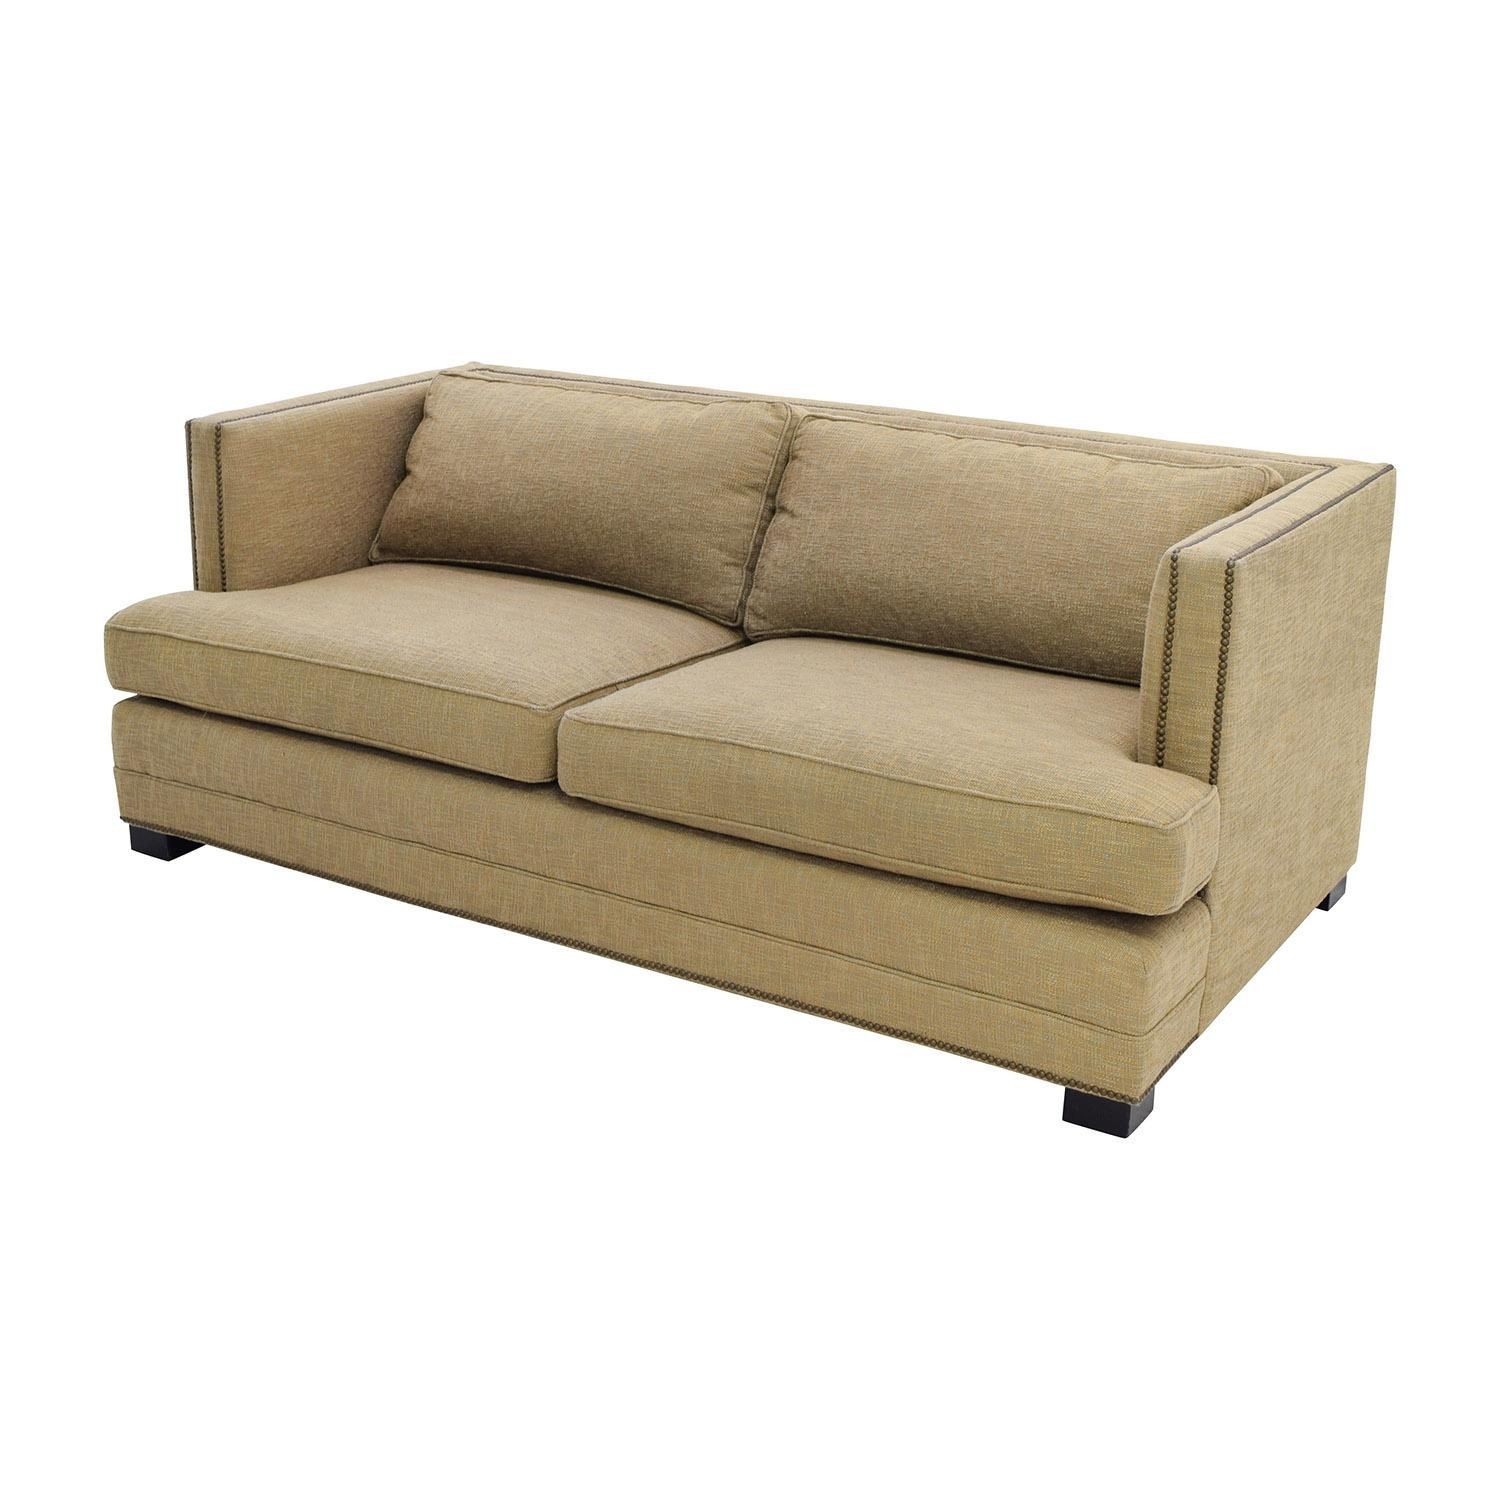 Furniture Home : Outstanding Mitchell Gold Clifton Sectional Sofa Intended For Mitchell Gold Sofa Slipcovers (View 15 of 20)